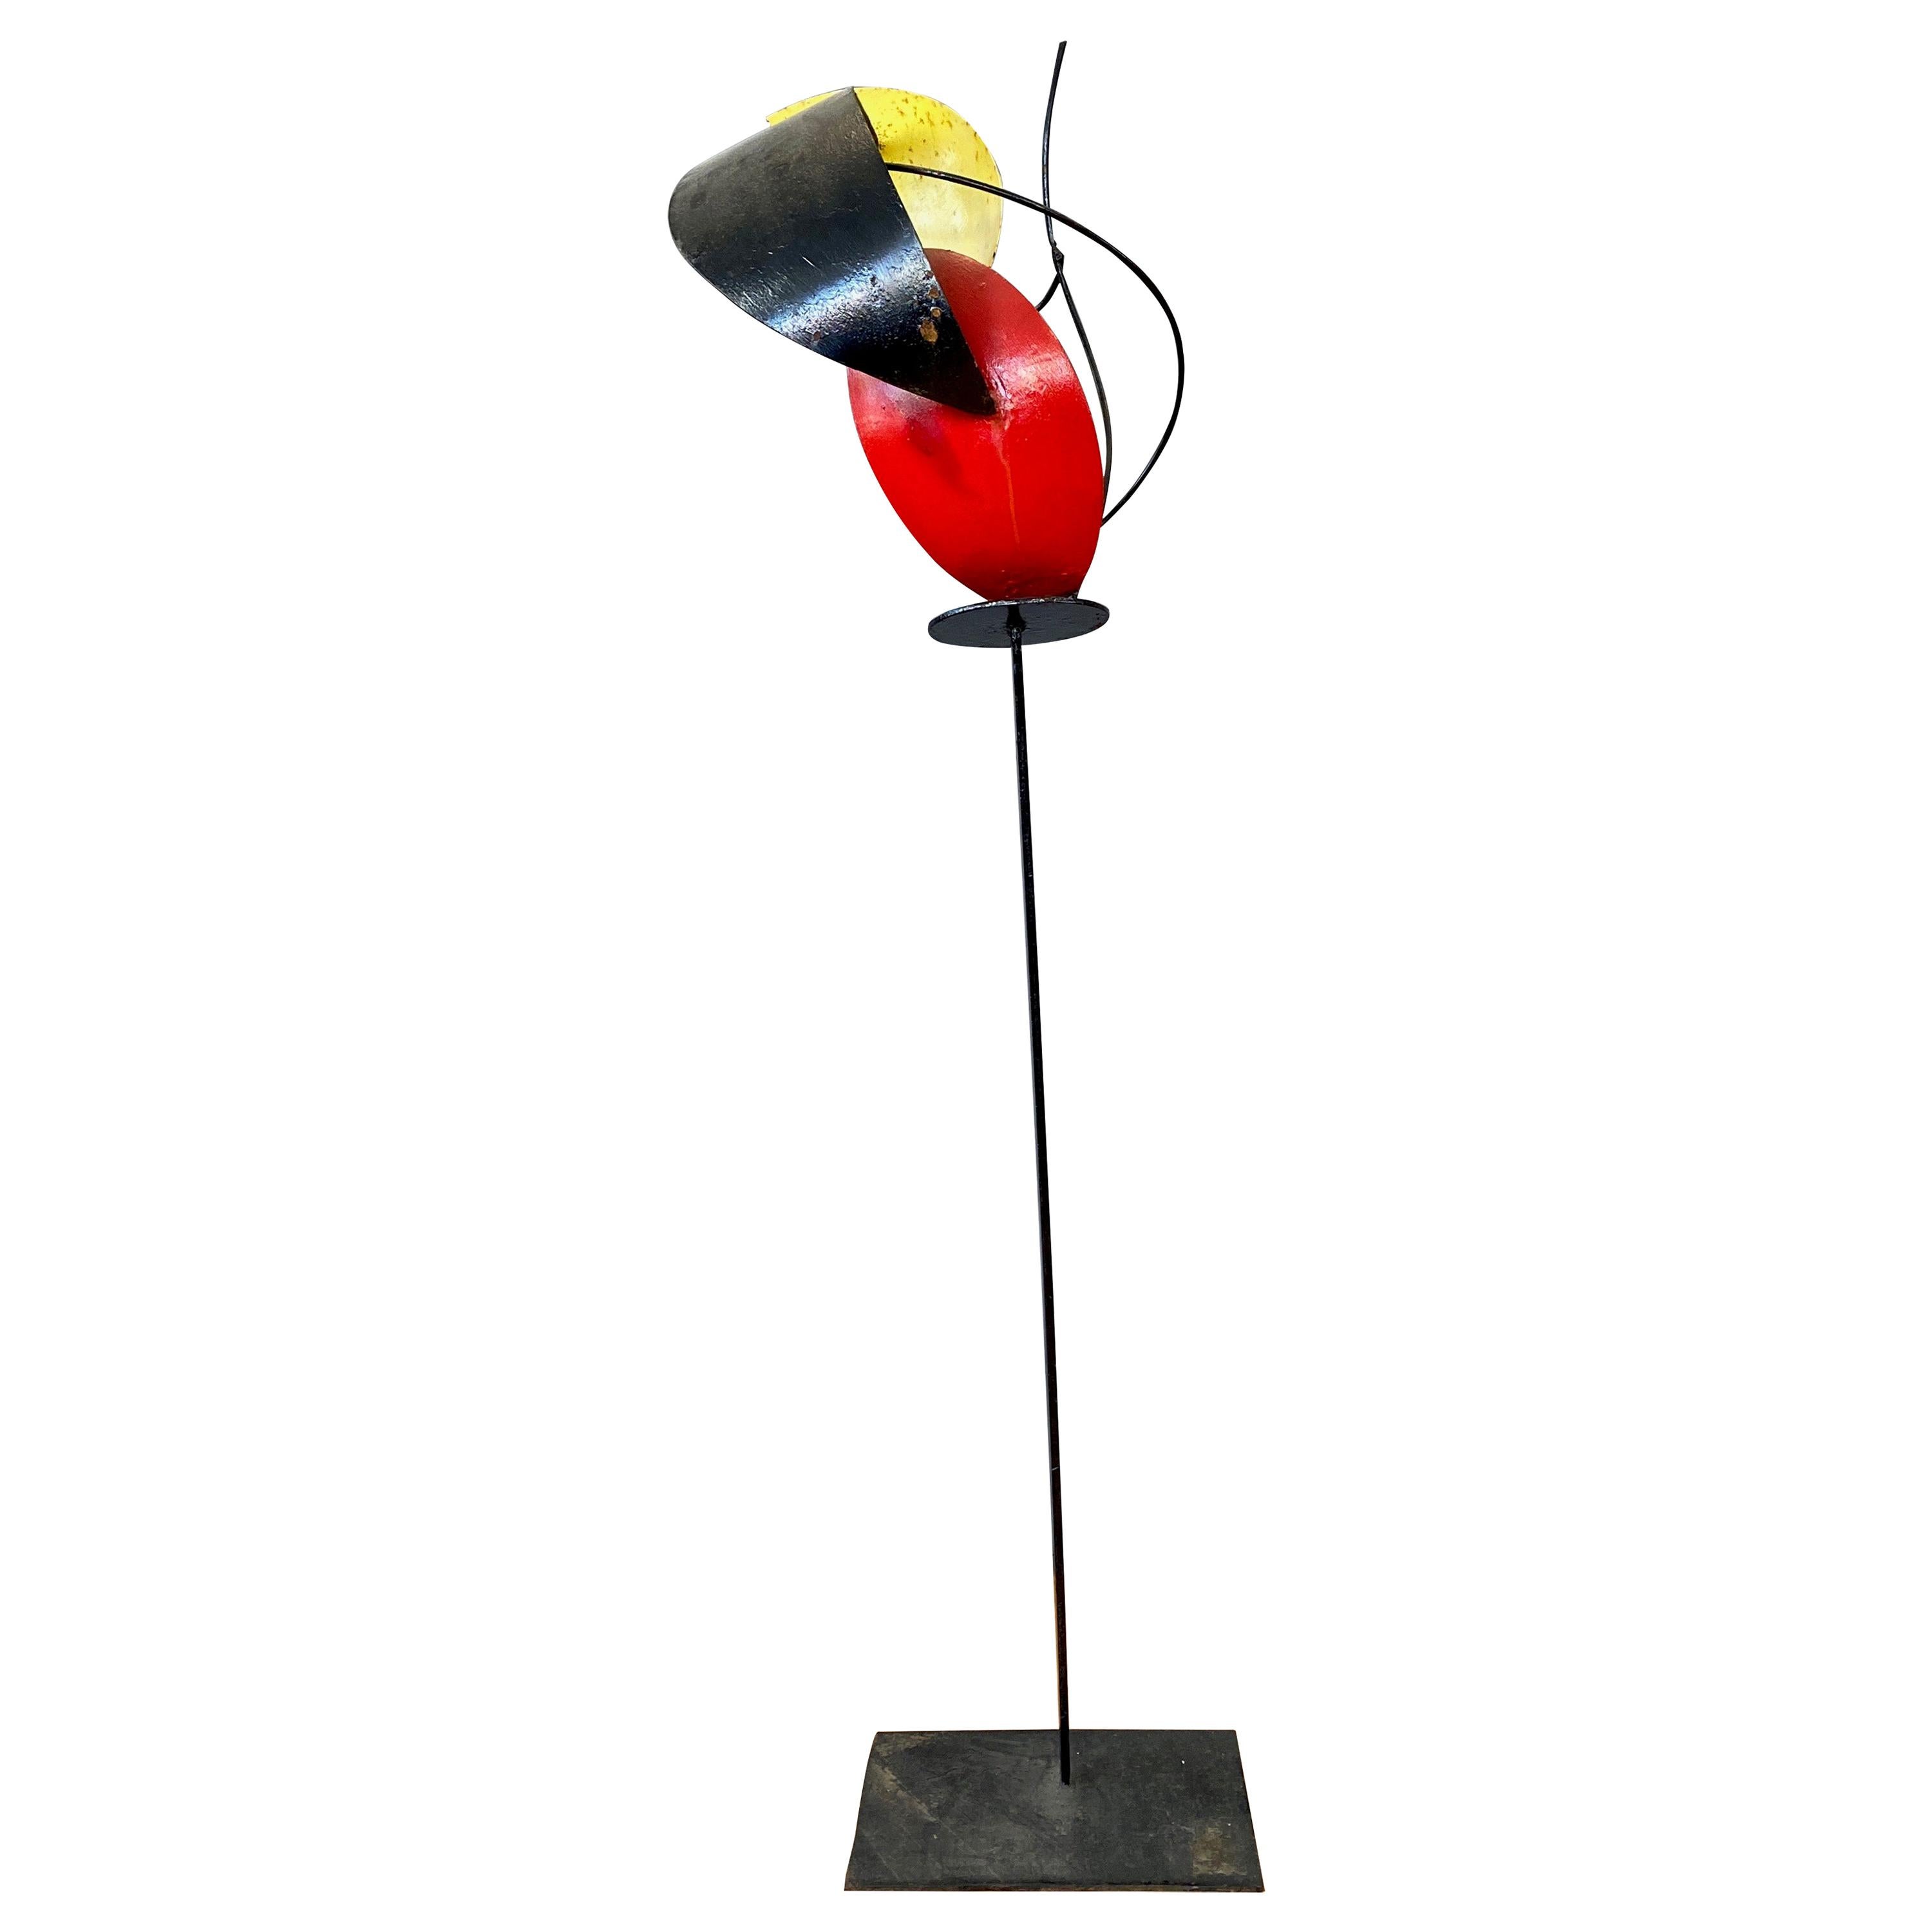 Béla Harcos Tall Abstract Expressionist Enameled Steel Sculpture, Late 1990s For Sale